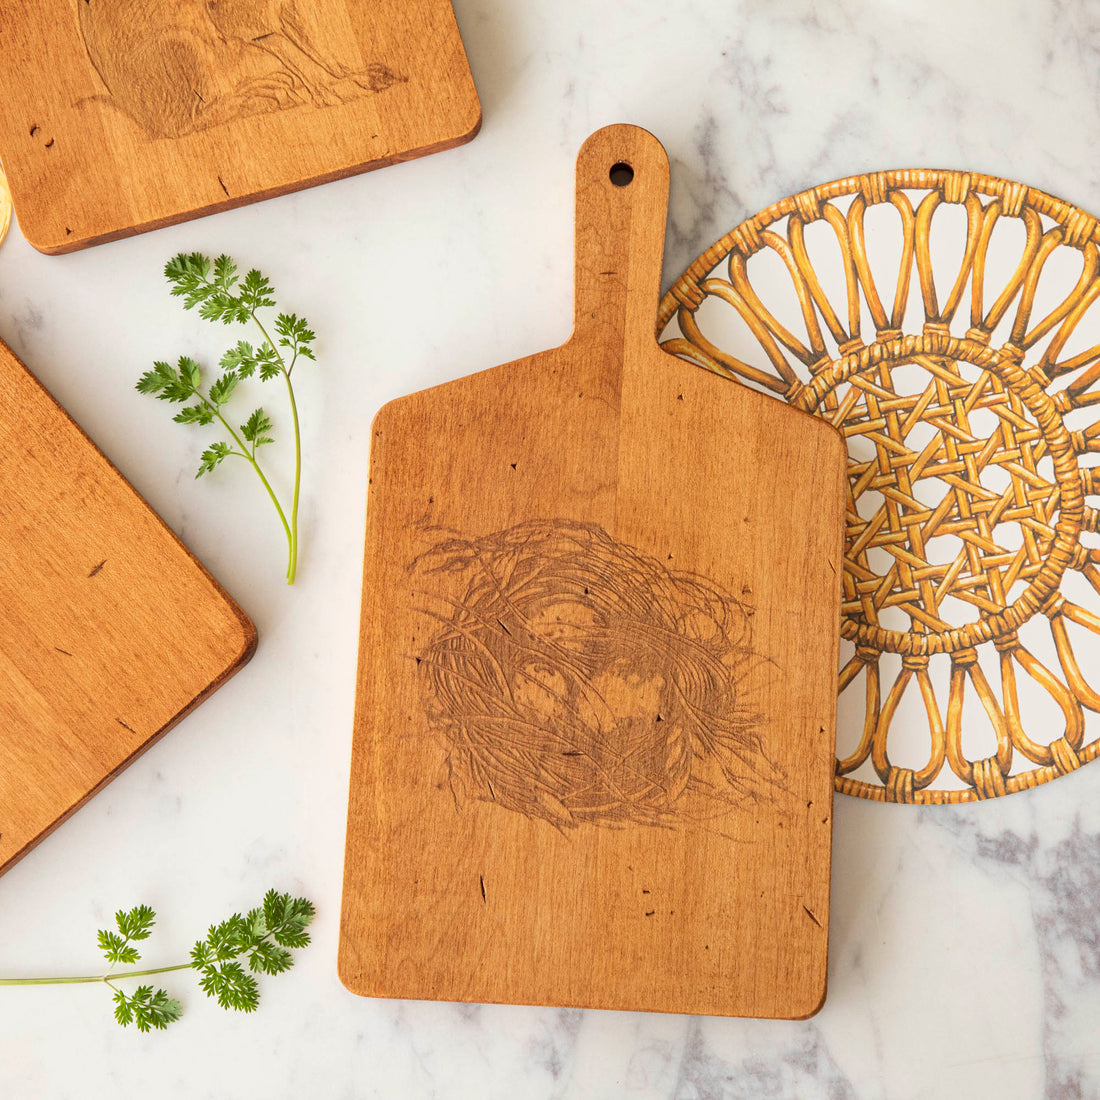 Wooden JK Adams Nest Artisan Maple Rectangle Cheese Board with visible knife marks next to a woven trivet and fresh herbs on a marble countertop.